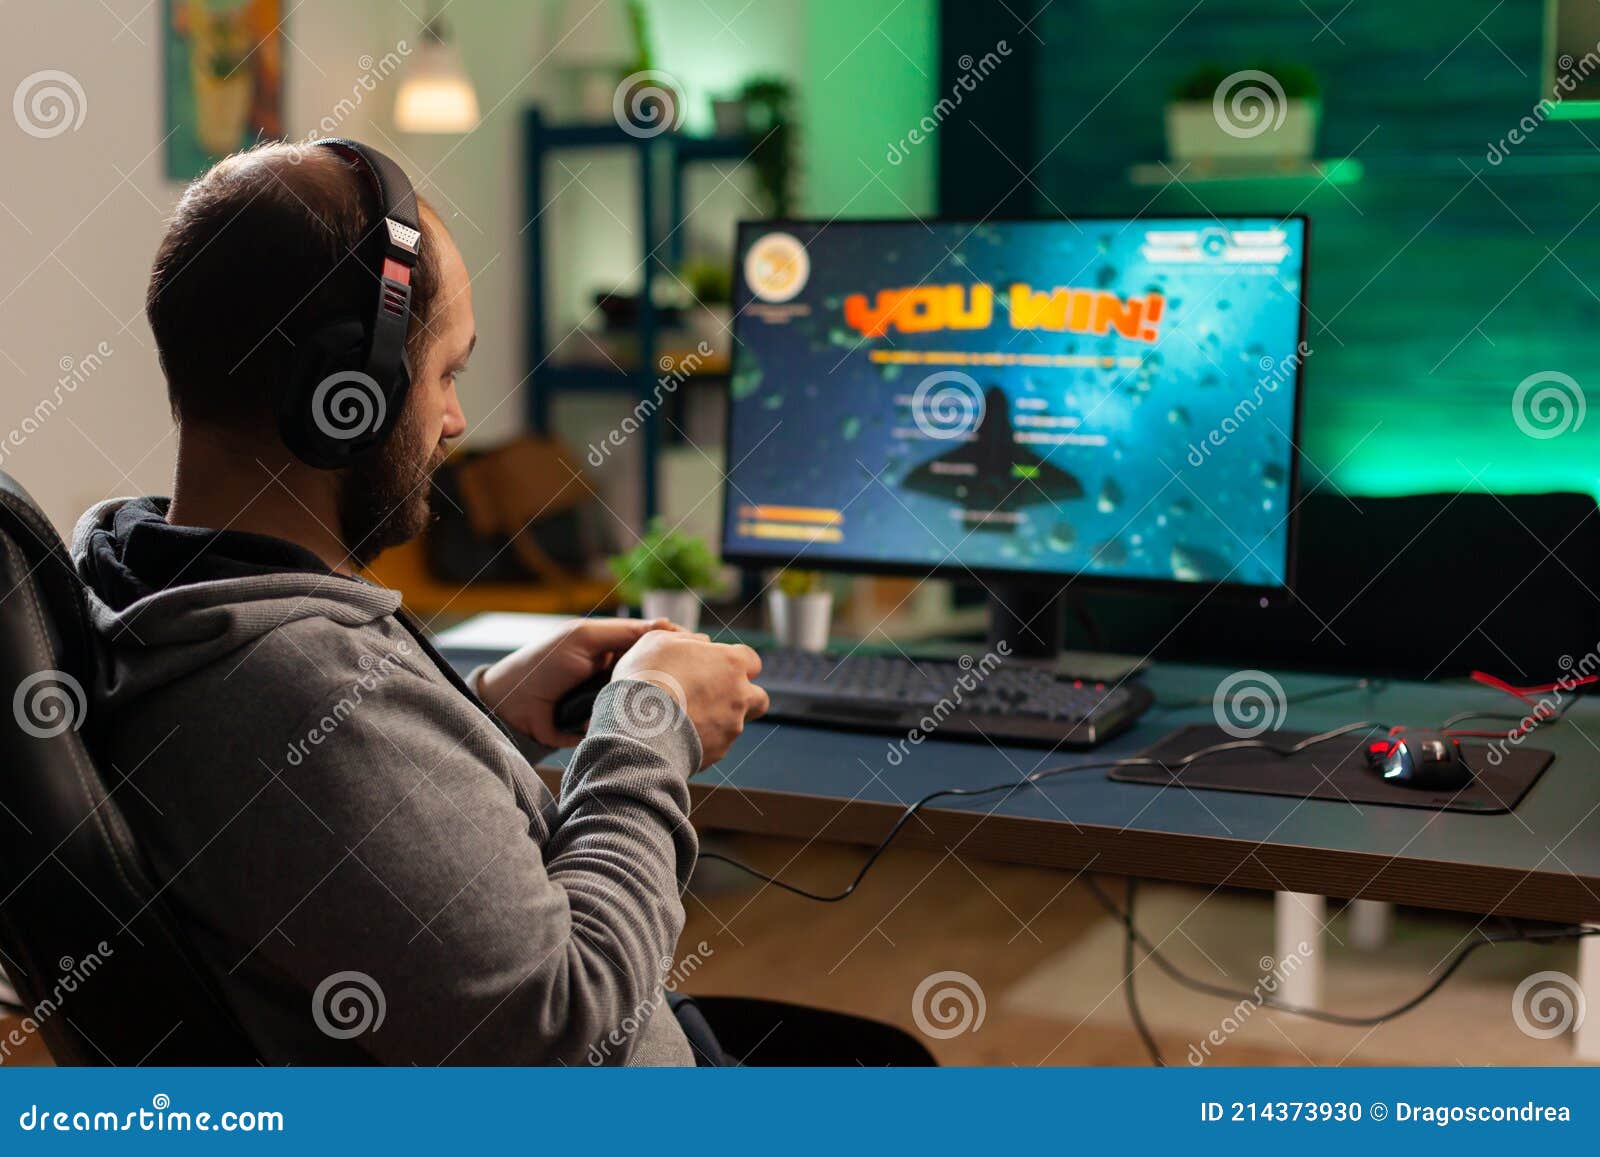 Back Shot of Pro Gamer Playing Online Shooter Game Stock Photo